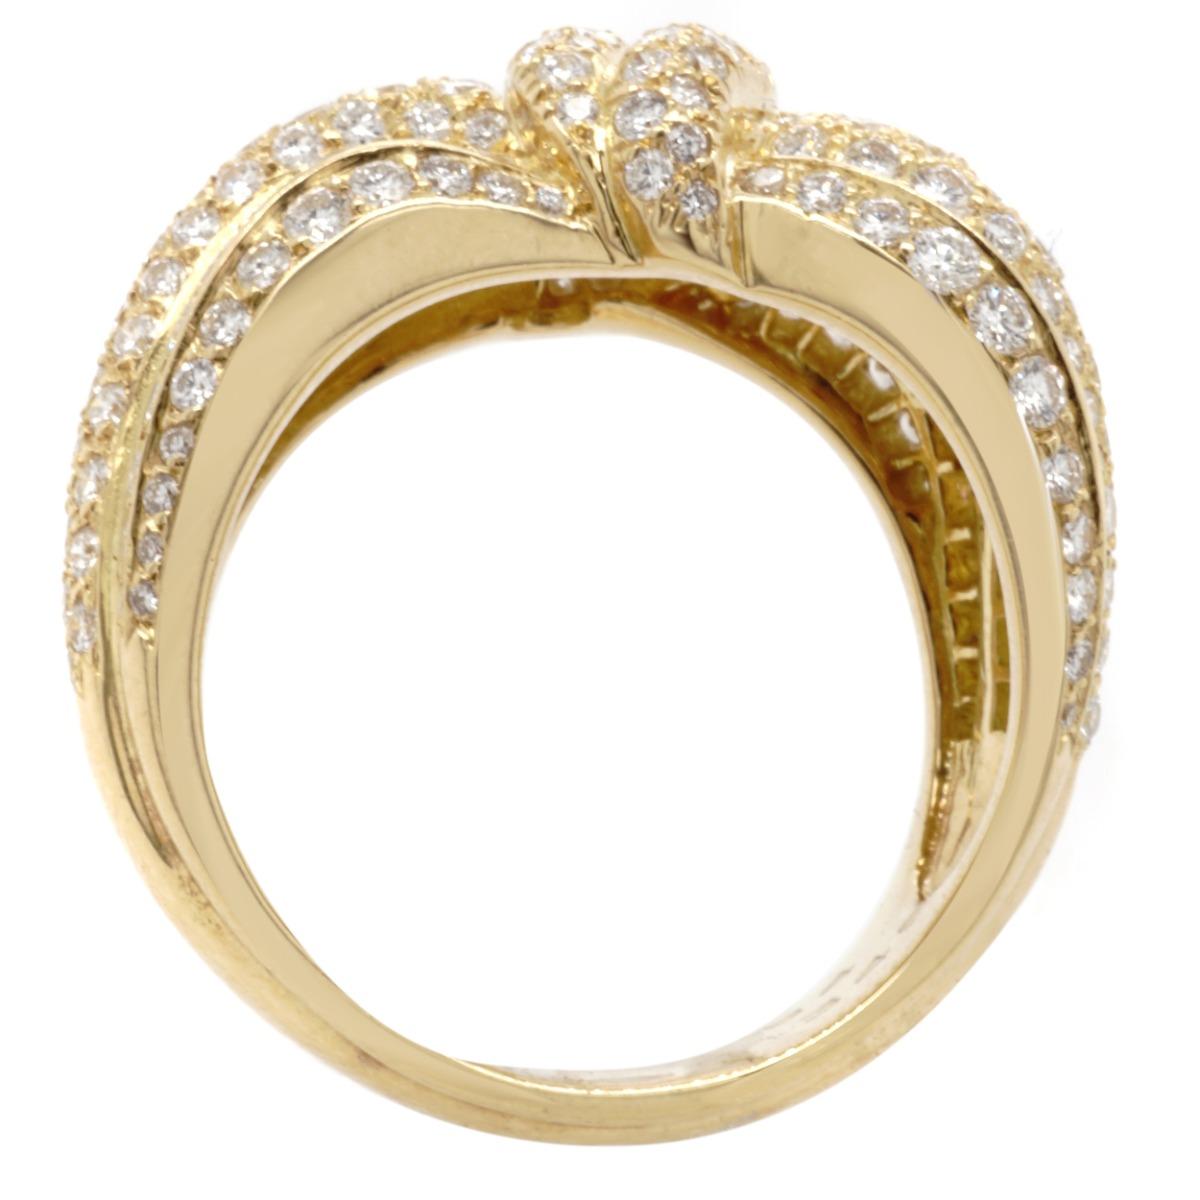 Van Cleef & Arpels Diamond and Gold Ring In Excellent Condition For Sale In New York, NY